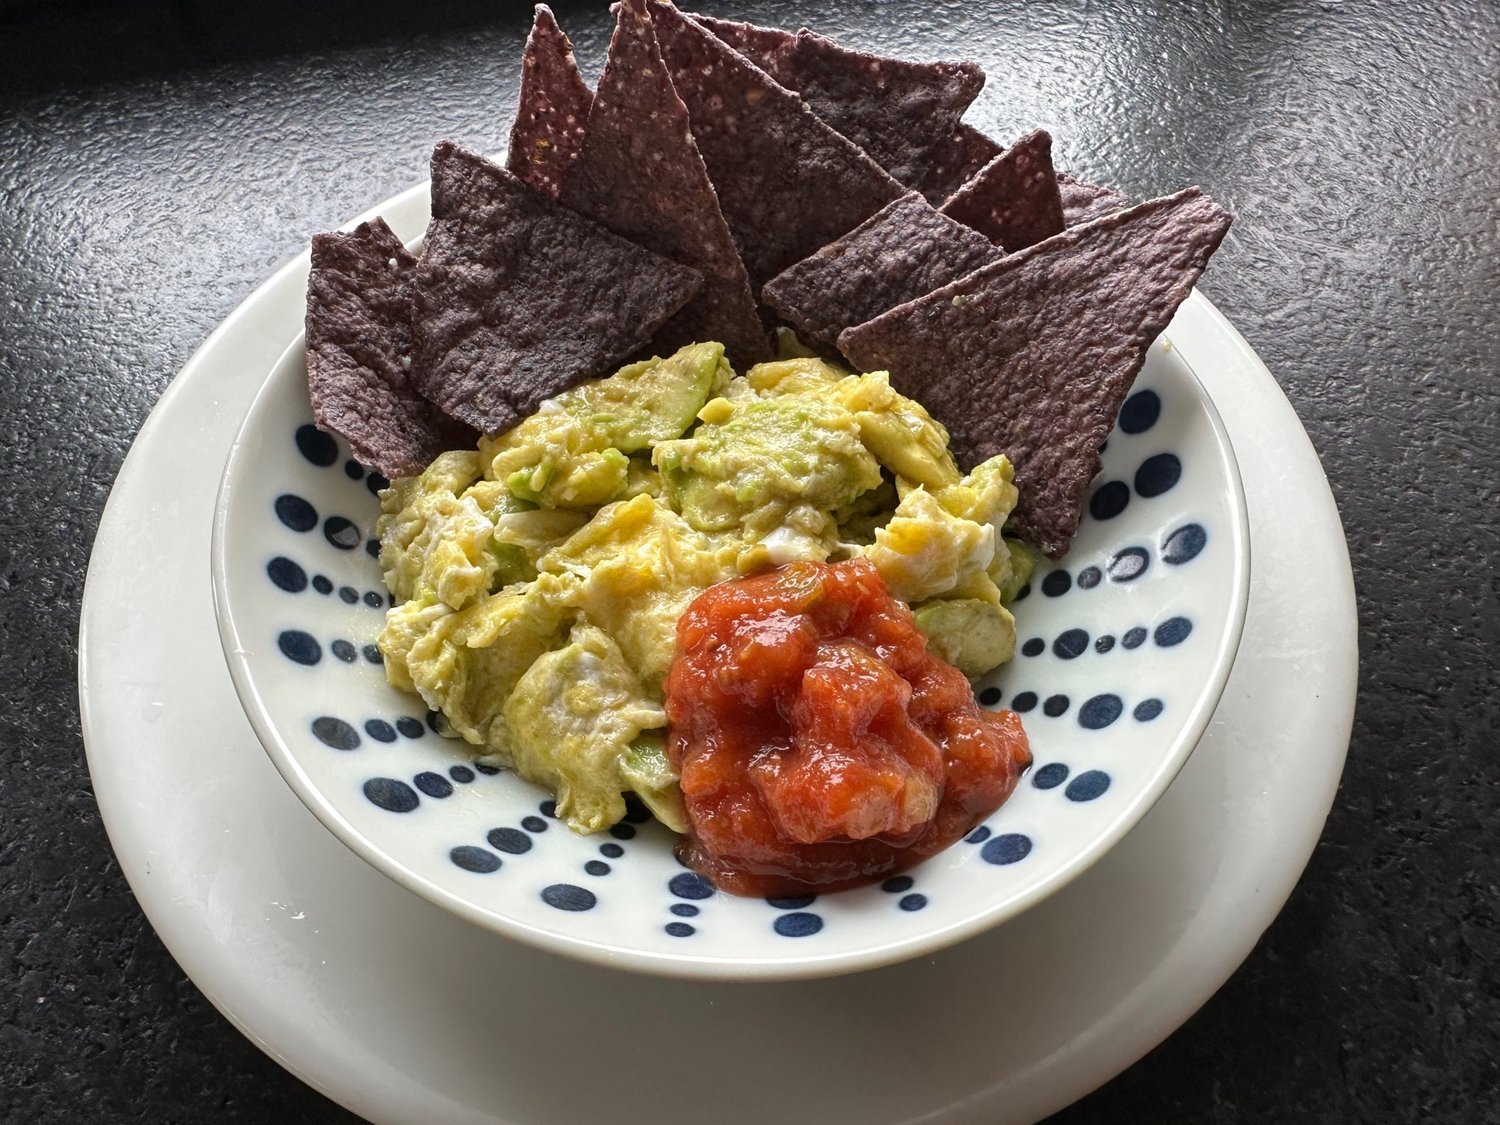 Avocado scrambled eggs, served with tortilla chips and salsa, is a unique dish to bring to Super Bowl parties.